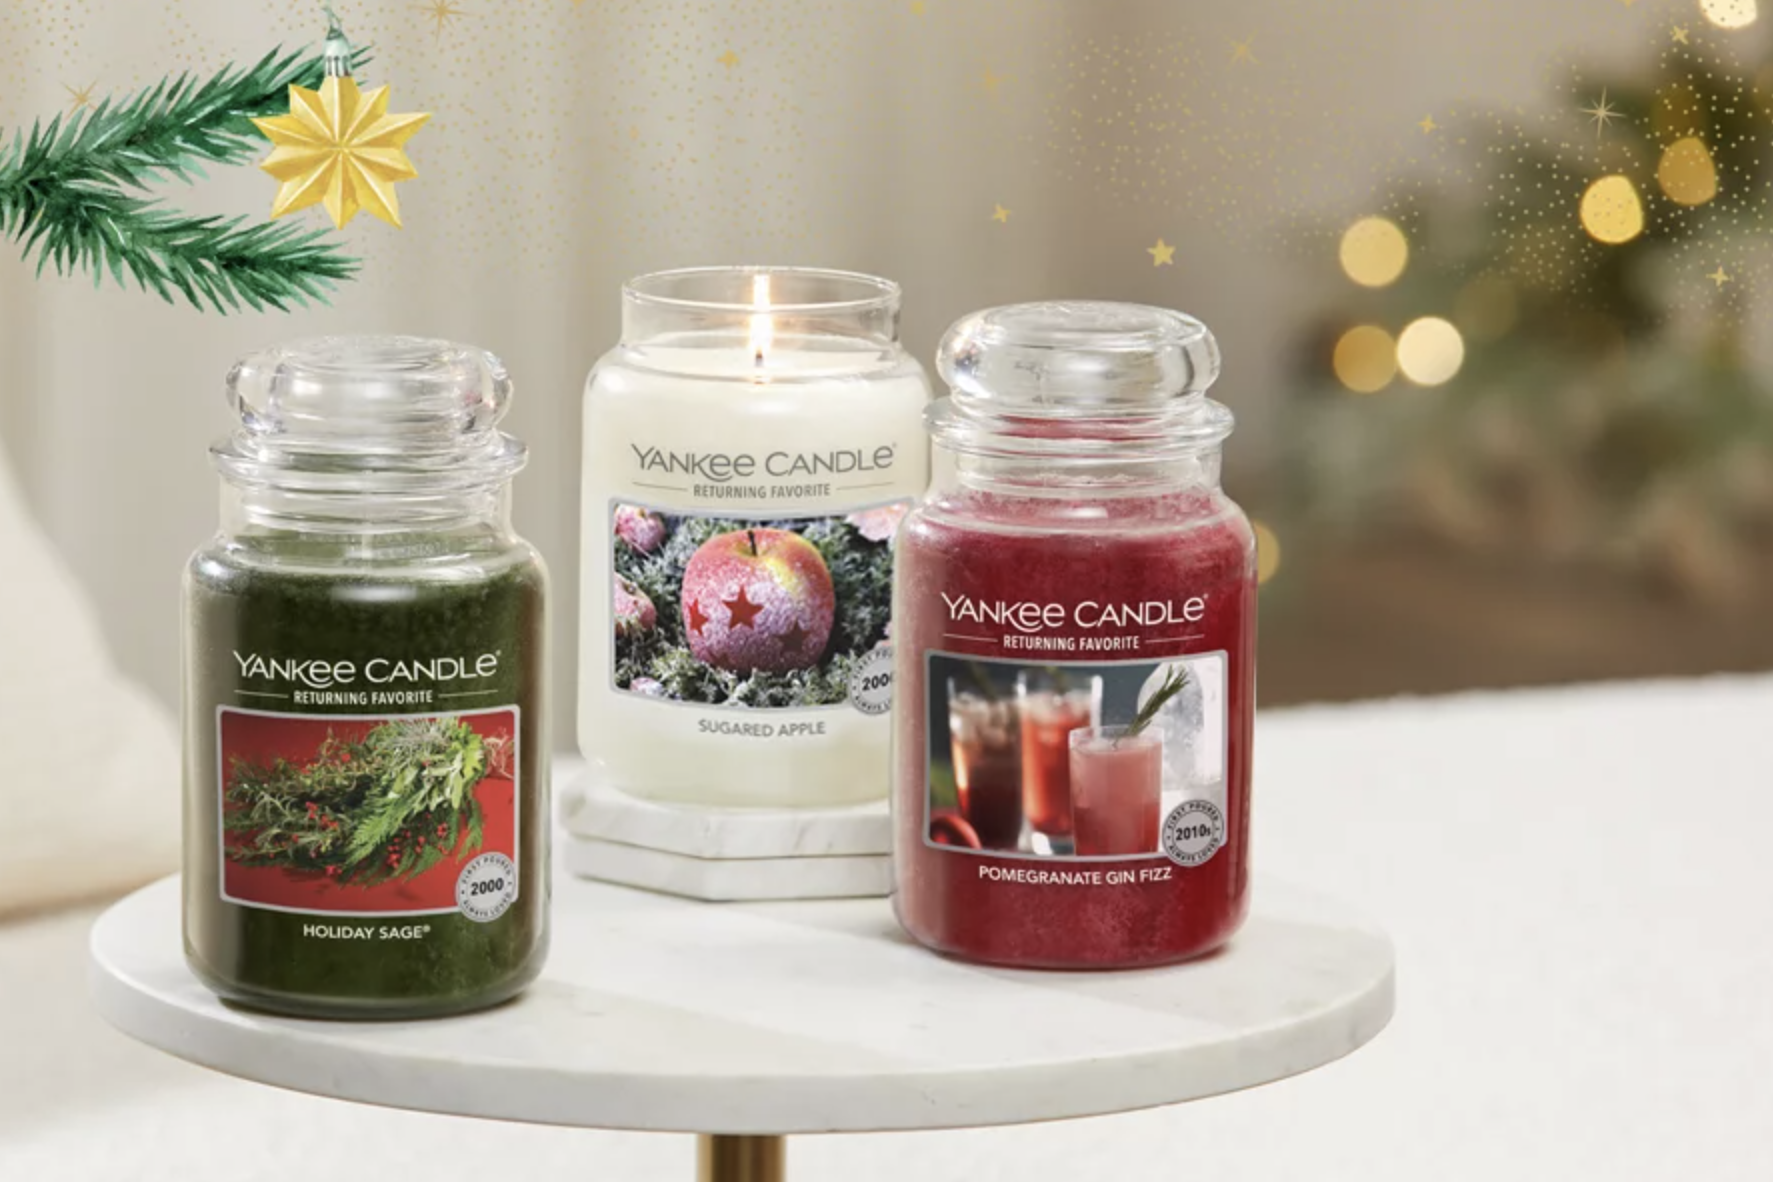 Holiday deals 2019: Get huge savings at Yankee Candle right now